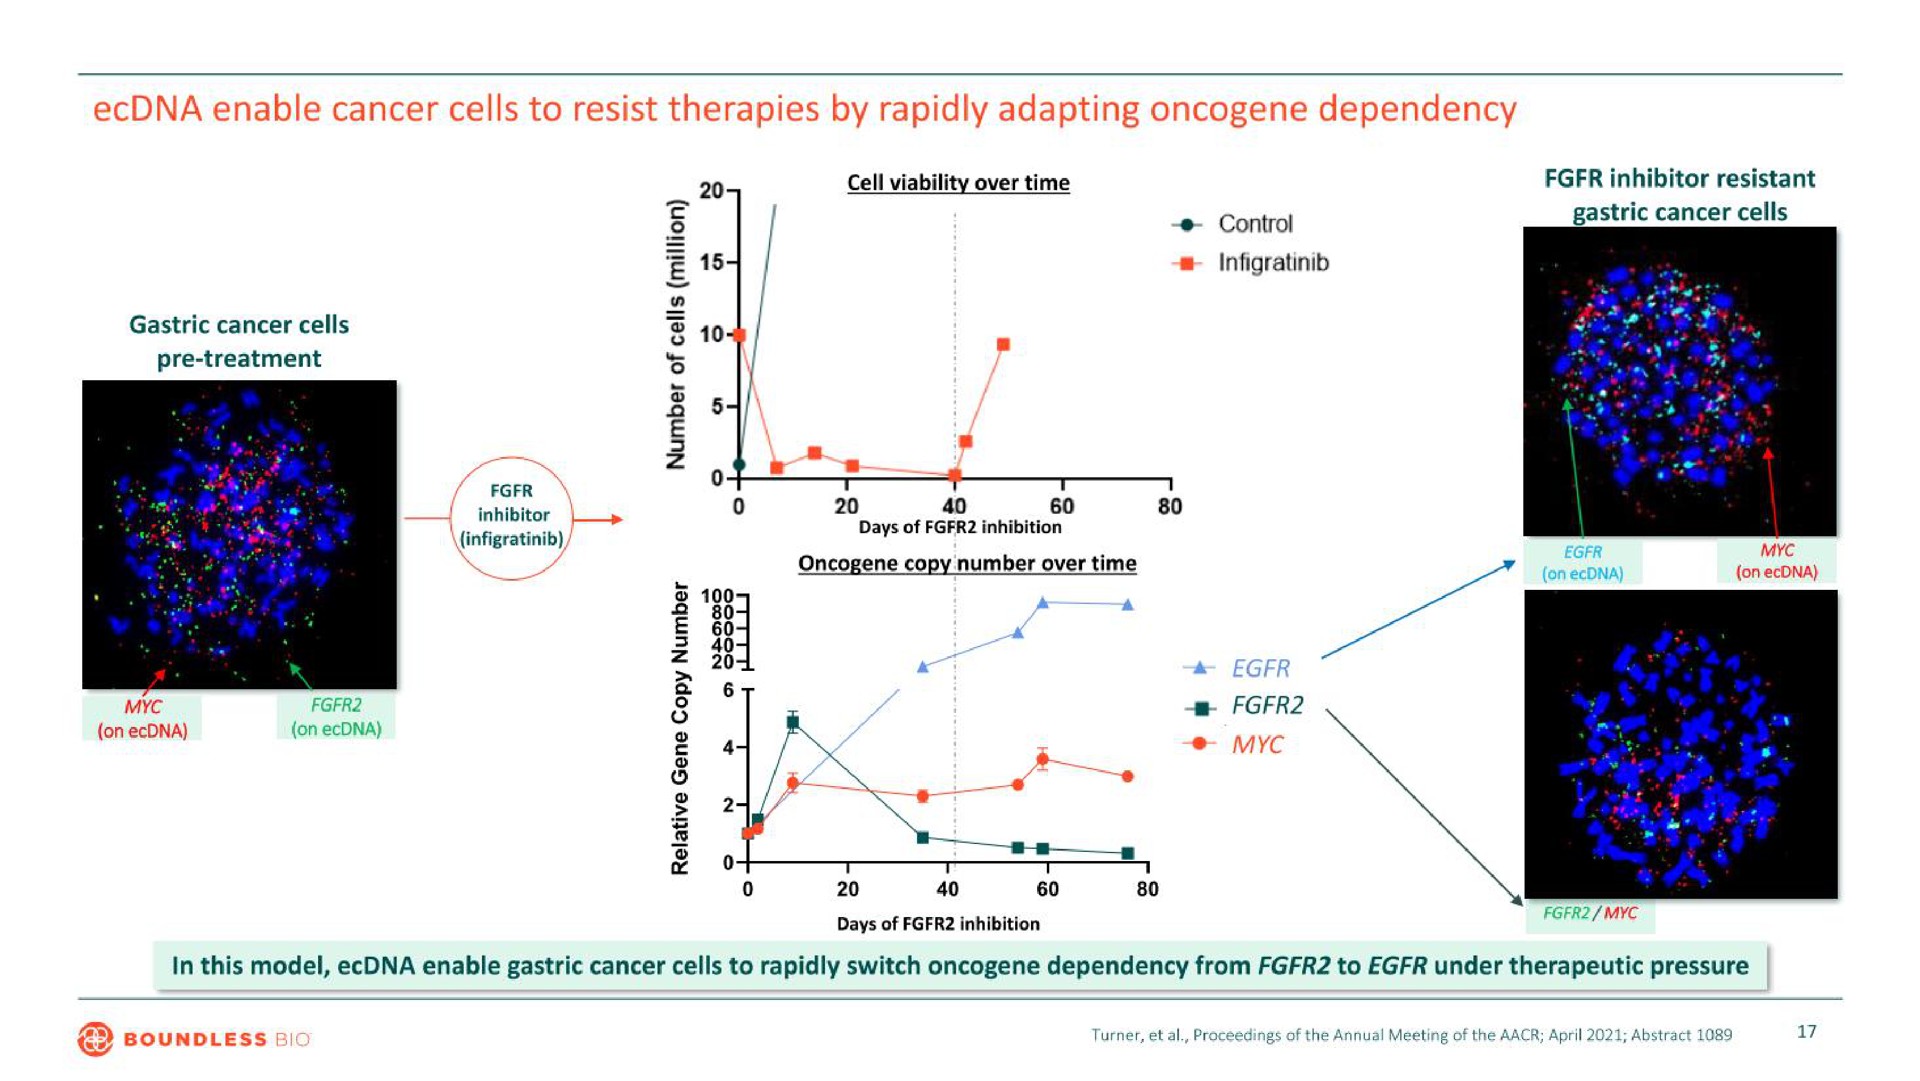 enable cancer cells to resist therapies by rapidly adapting dependency a rode | Boundless Bio